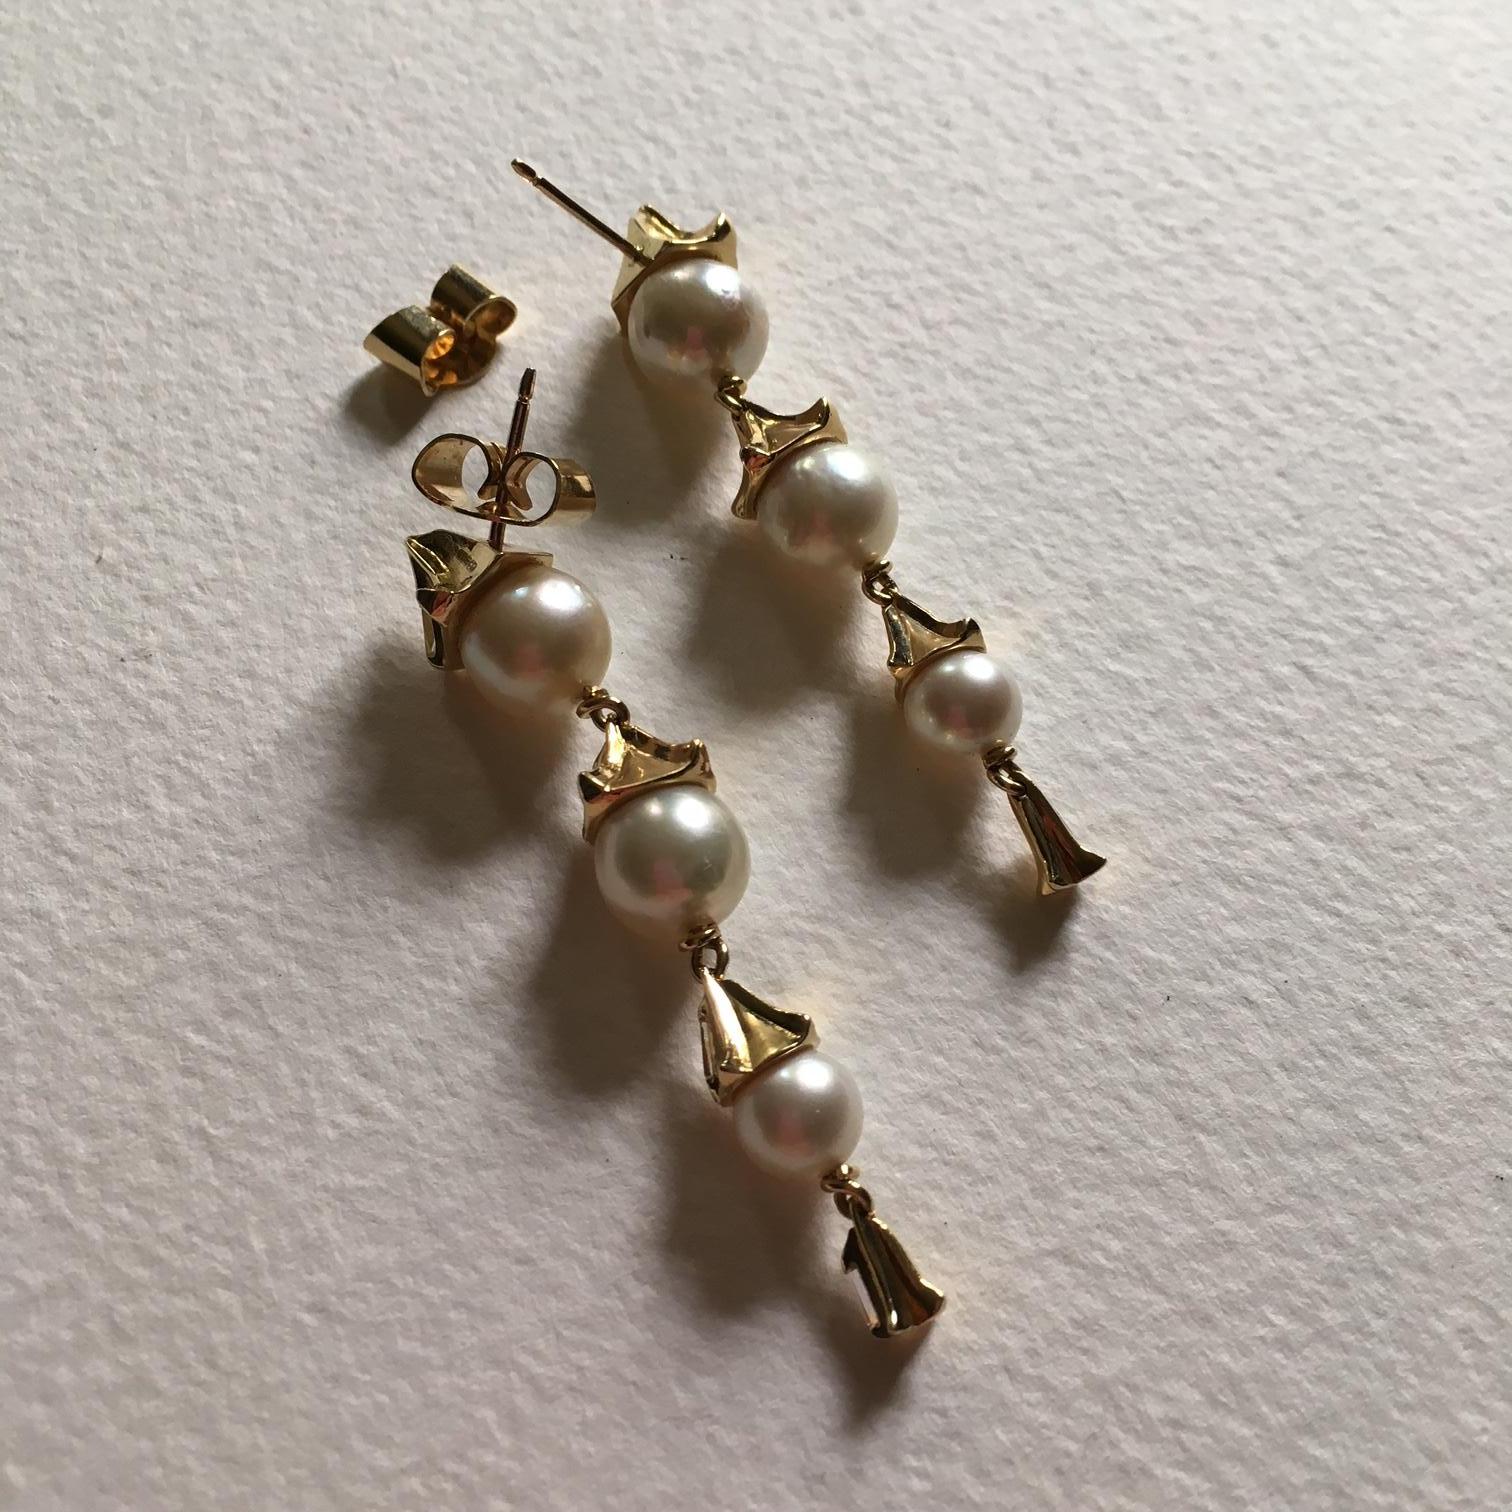 Pavilion earrings in 18ct yellow gold, set with tapered baguette diamonds (0.43ct) and graduated Akoya pearls, they fasten to the ear by means of posts with scroll fittings. The design for these earrings was inspired by rooves of the Phoenix